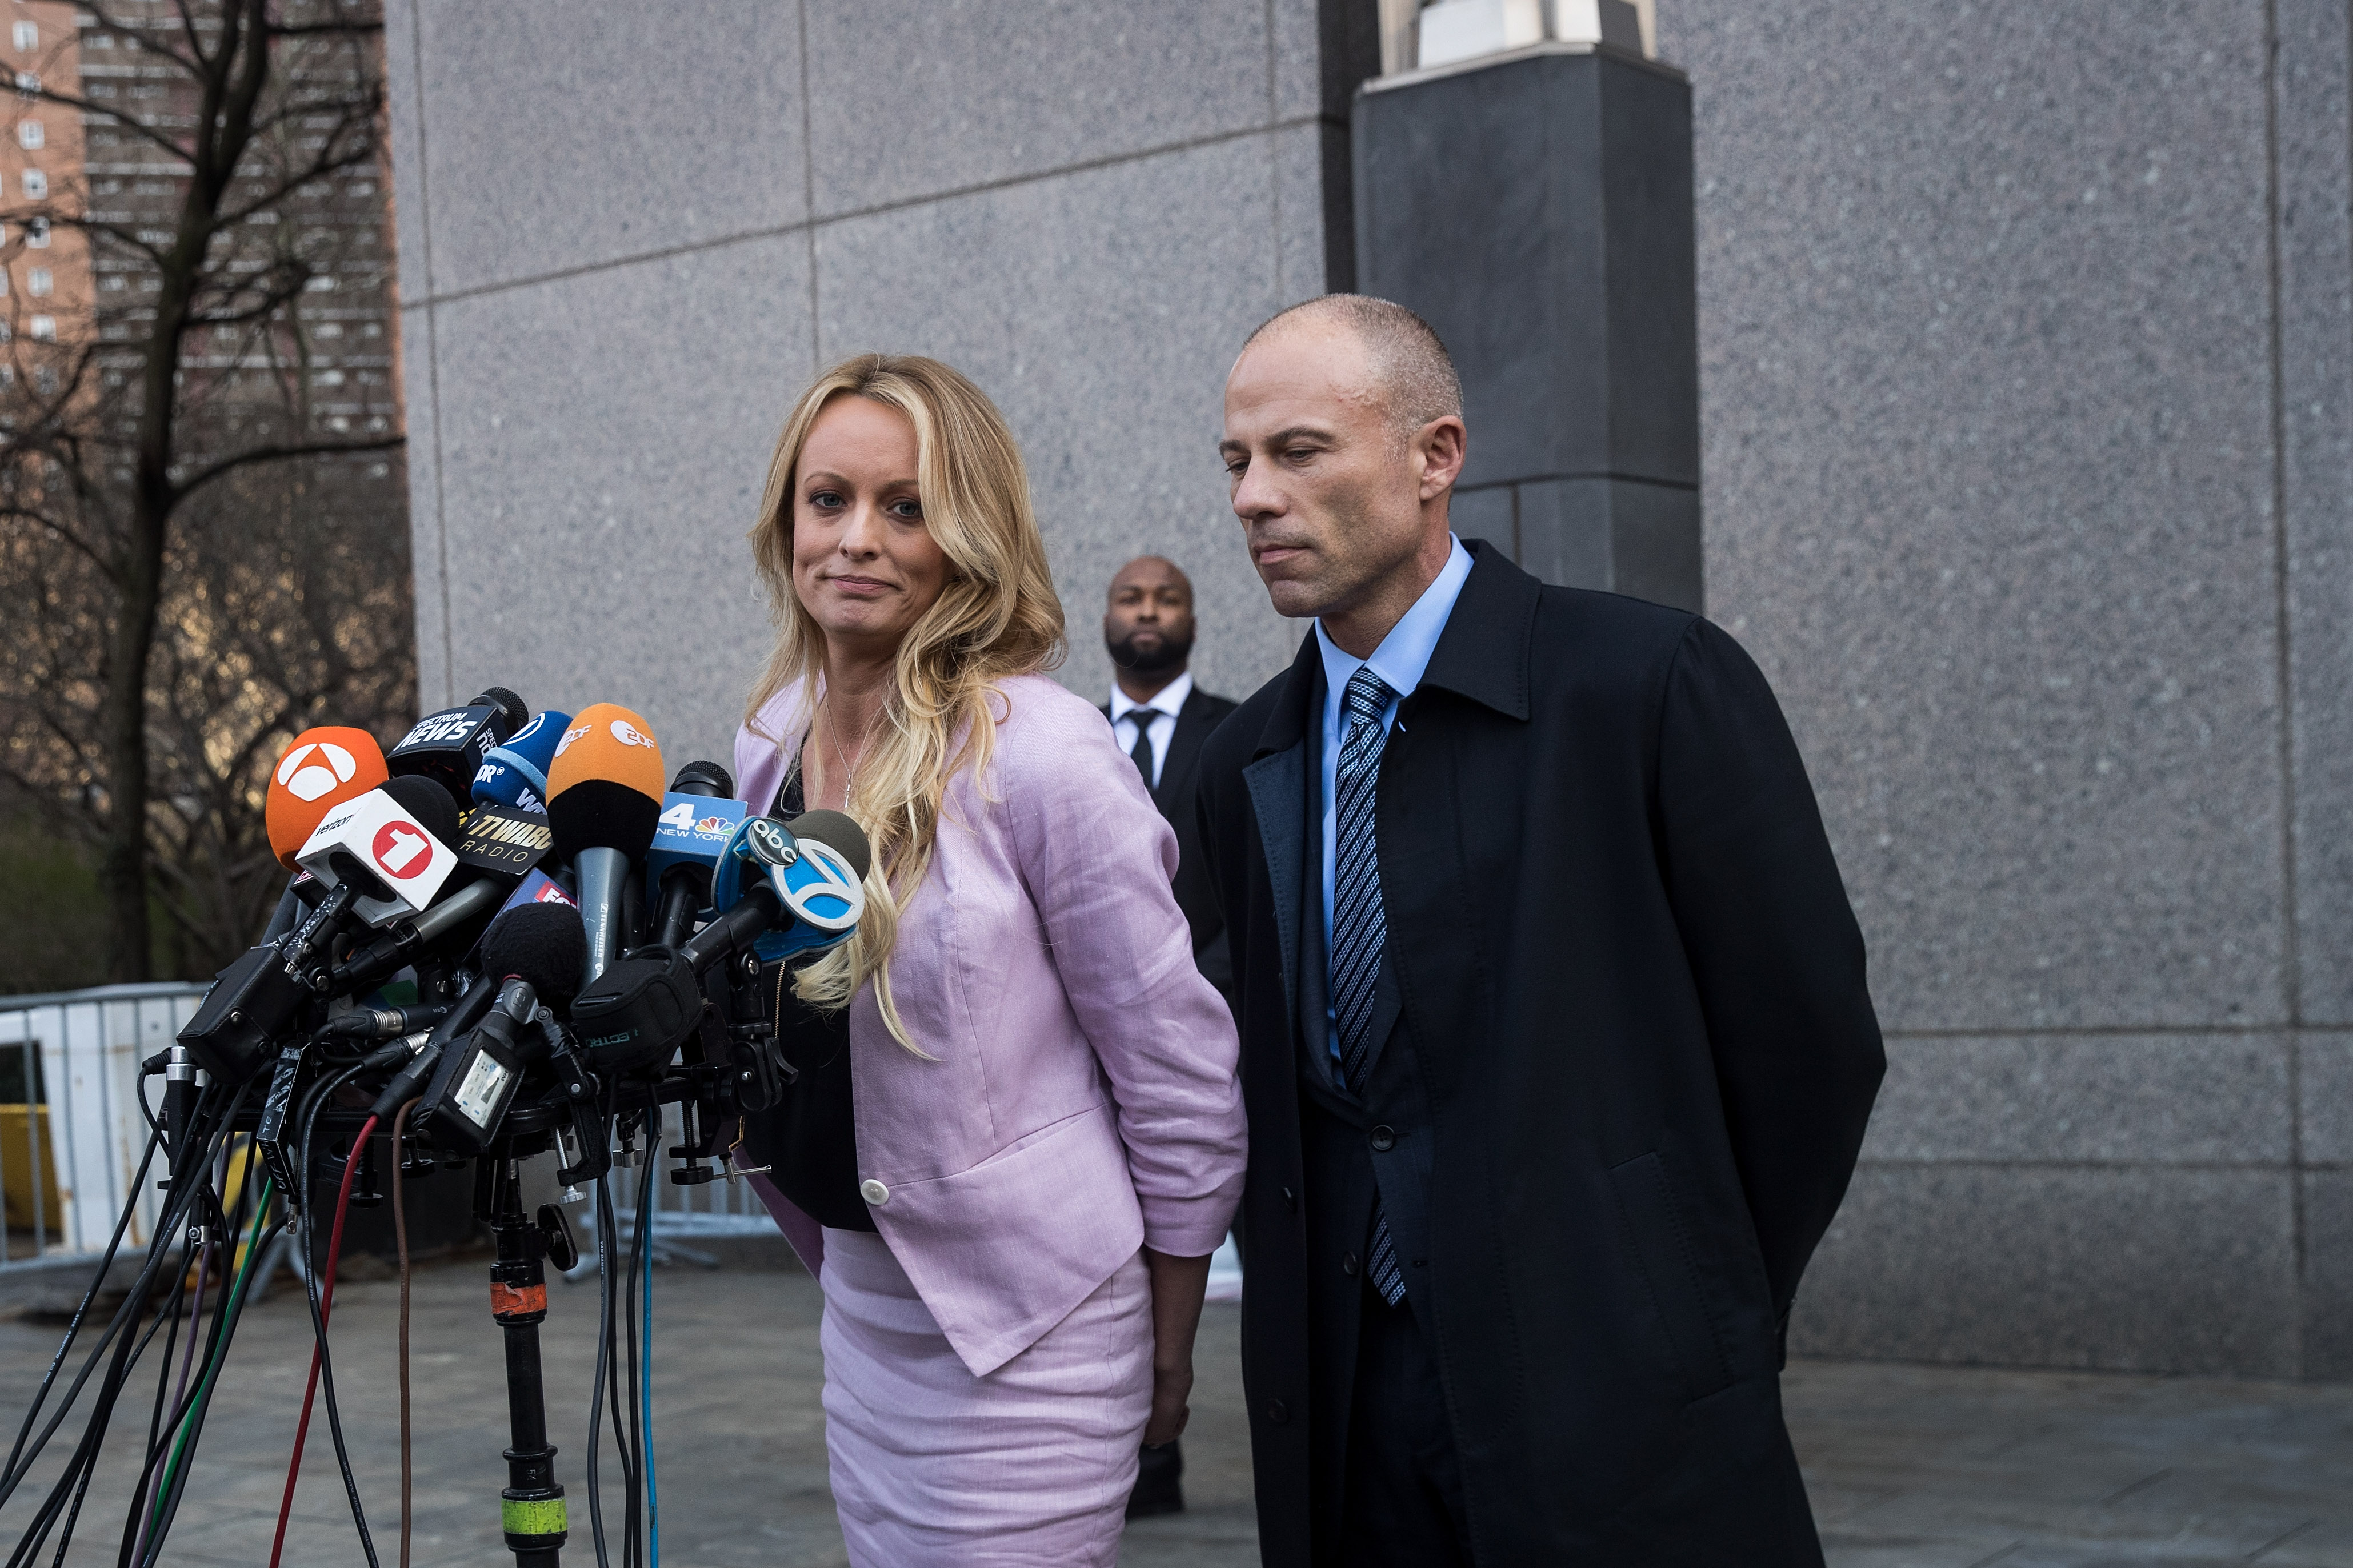 NEW YORK, NY - APRIL 16: (L to R) Adult film actress Stormy Daniels (Stephanie Clifford) and Michael Avenatti, attorney for Stormy Daniels, speak to the media as they exit the United States District Court Southern District of New York for a hearing related to Michael Cohen, President Trump's longtime personal attorney and confidante, April 16, 2018 in New York City. Cohen and lawyers representing President Trump are asking the court to block Justice Department officials from reading documents and materials related to Cohen's relationship with President Trump that they believe should be protected by attorney-client privilege. Officials with the FBI, armed with a search warrant, raided Cohen's office and two private residences last week. (Photo by Drew Angerer/Getty Images)